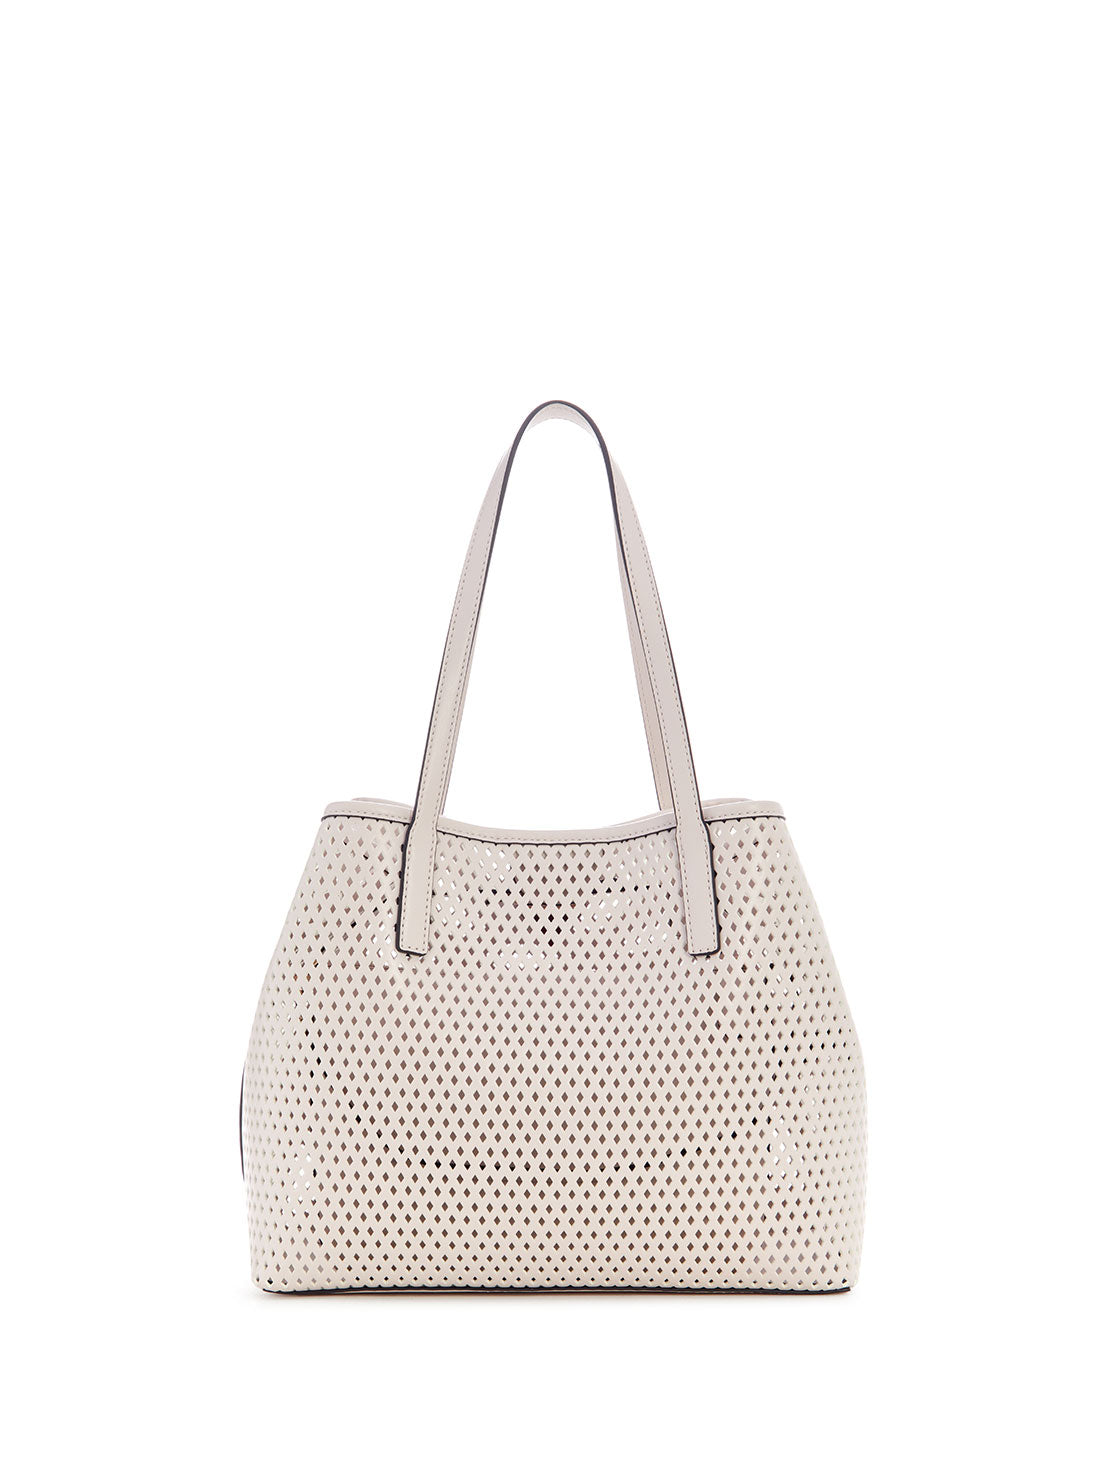 GUESS Women's Stone Woven Vikky Tote Bag WP699523 Back View